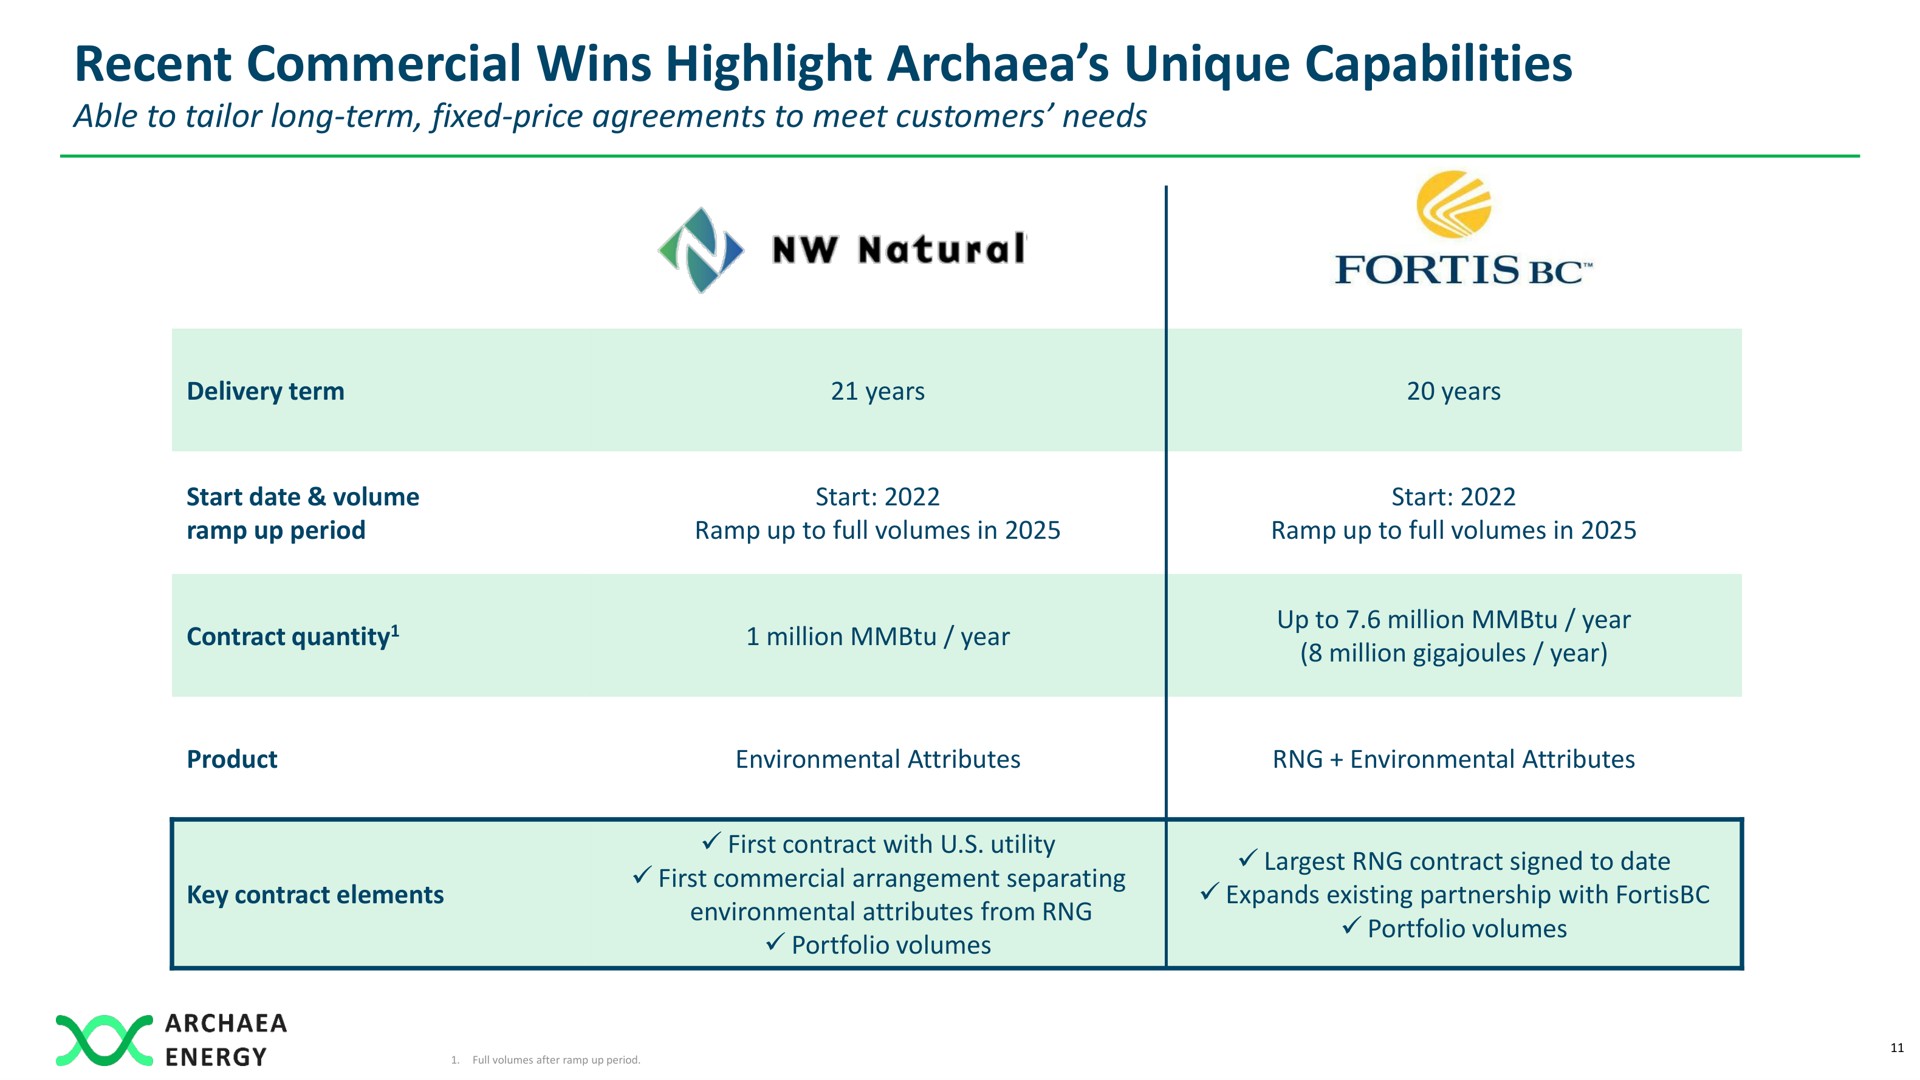 recent commercial wins highlight unique capabilities fortis | Archaea Energy